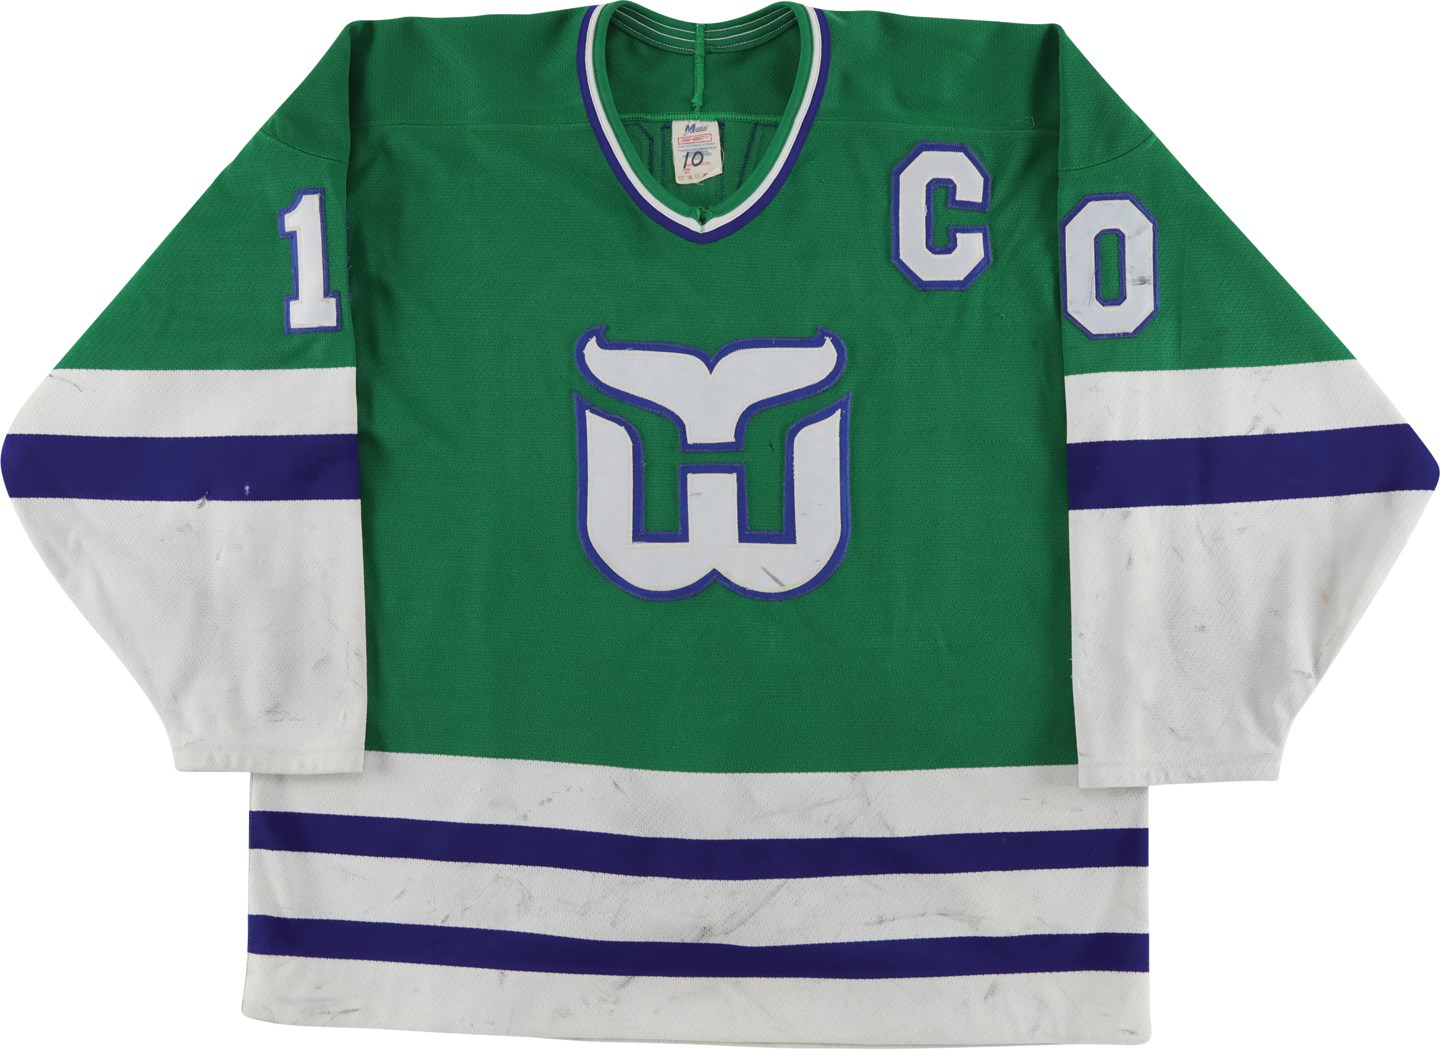 12/15/90 Ron Francis Photo-Matched Hartford Whalers Game Worn Jersey (Photo-Matched)